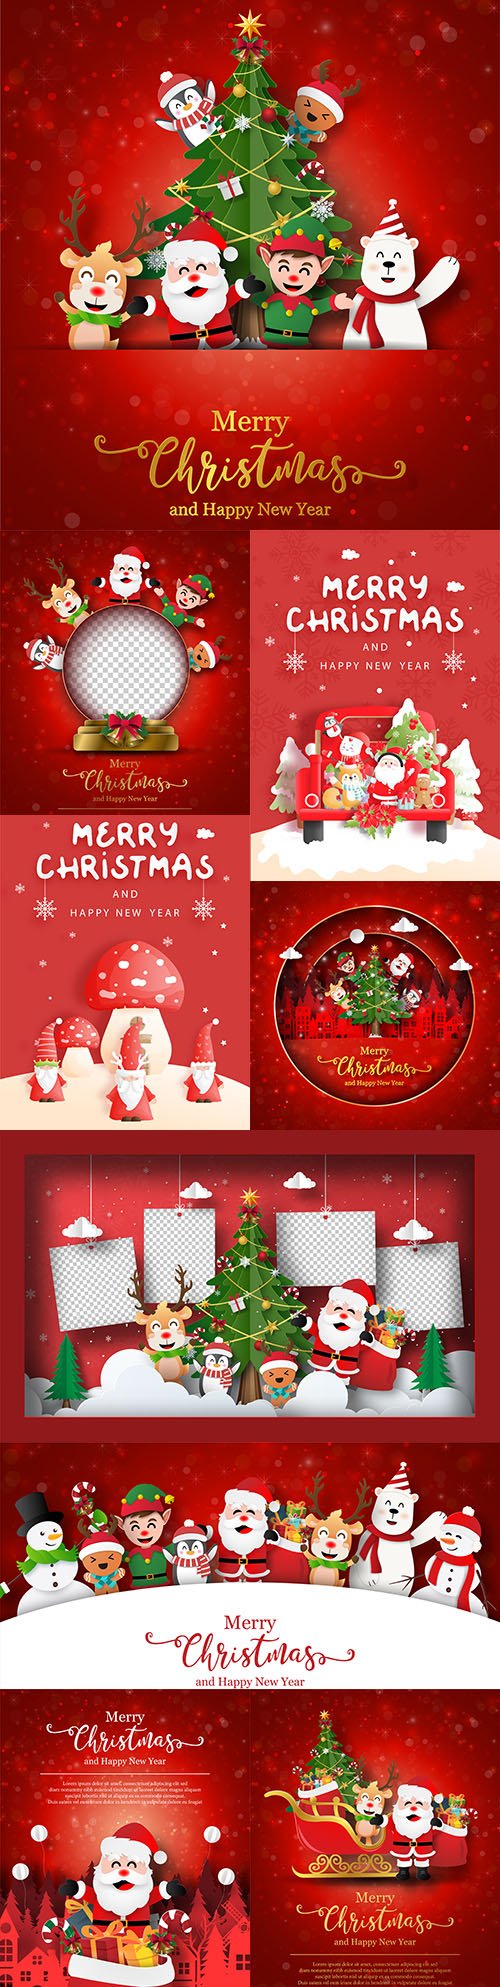 Santa Claus Christmas card and friends with gifts